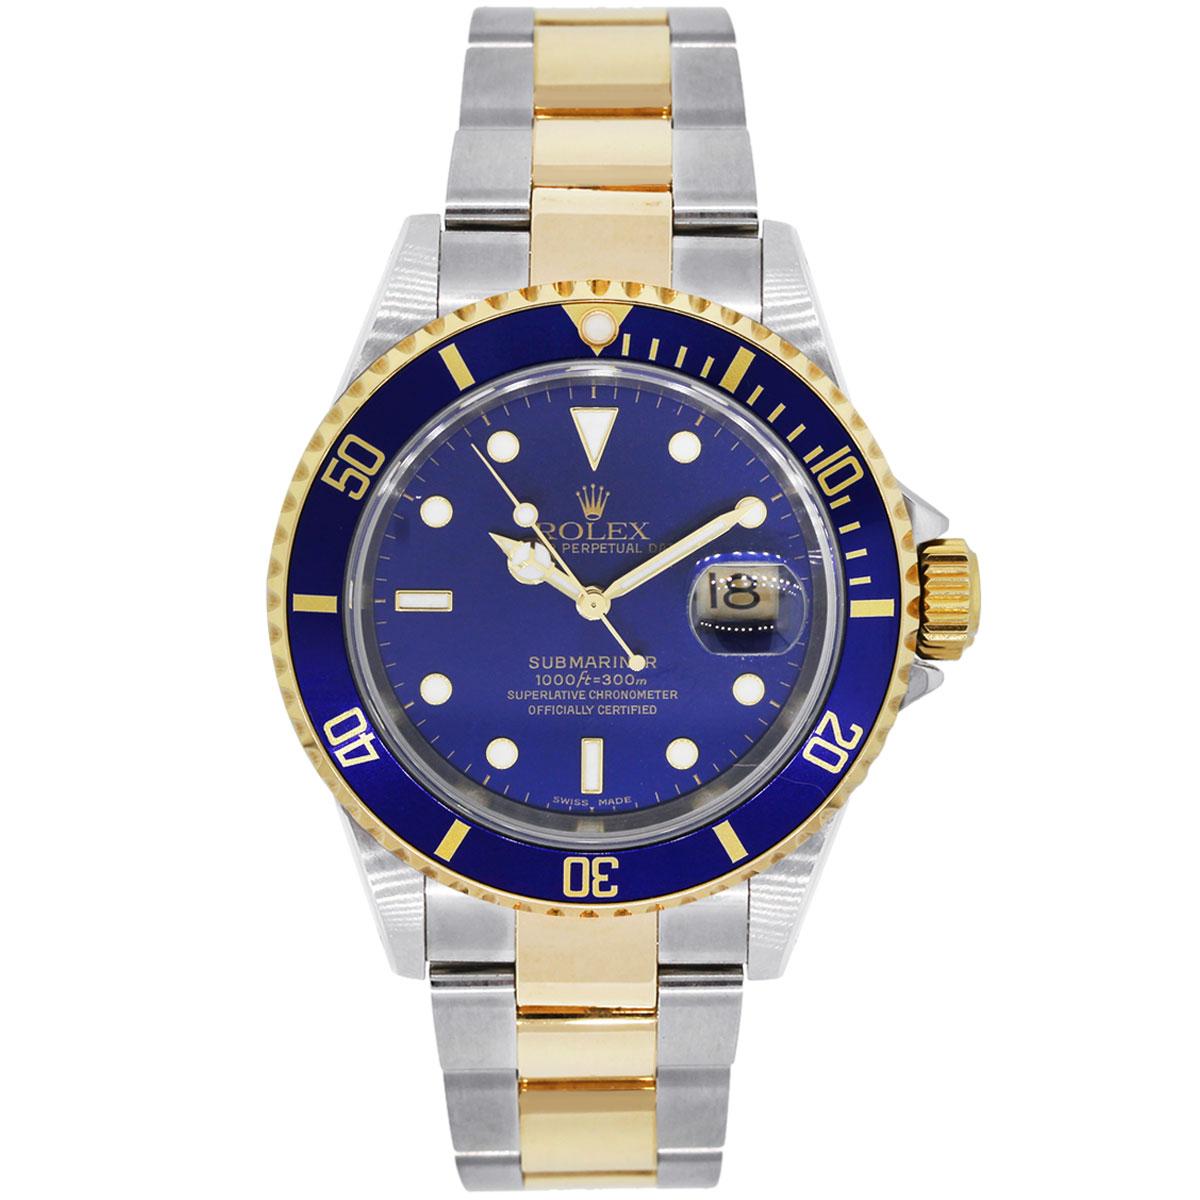 Brand: Rolex
MPN: 16613
Model: Submariner
Case Material: Stainless Steel
Case Diameter: 40mm
Crystal: Scratch resistant sapphire
Bezel: 18k yellow gold blue bezel
Dial: Blue dial with luminescent hour markers and date window at the 3 o’clock